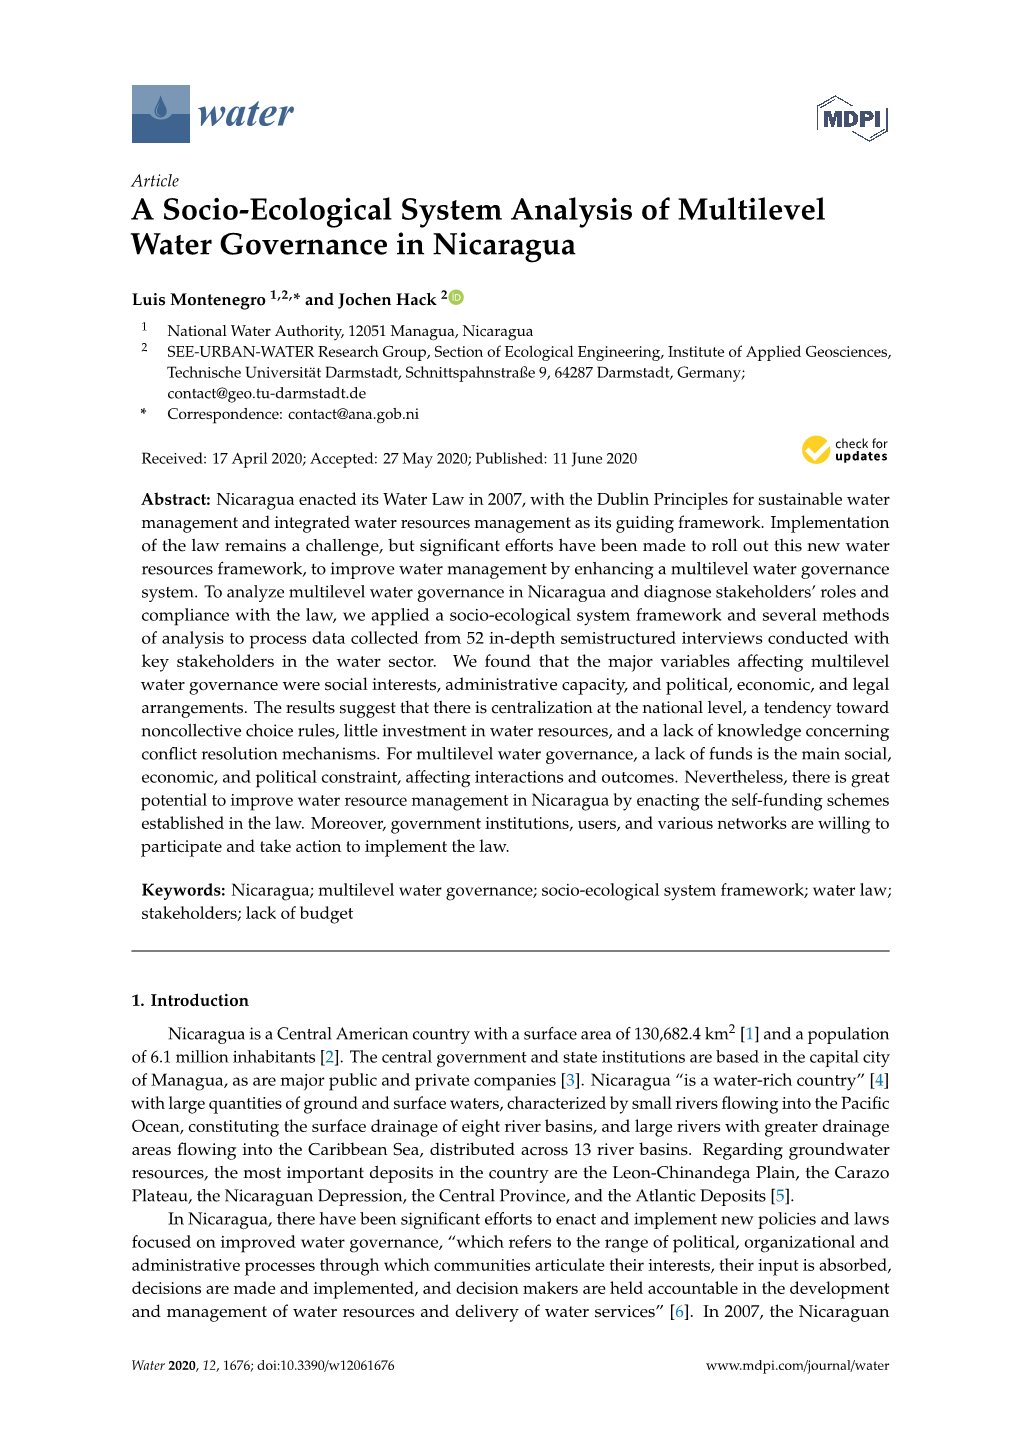 A Socio-Ecological System Analysis of Multilevel Water Governance in Nicaragua